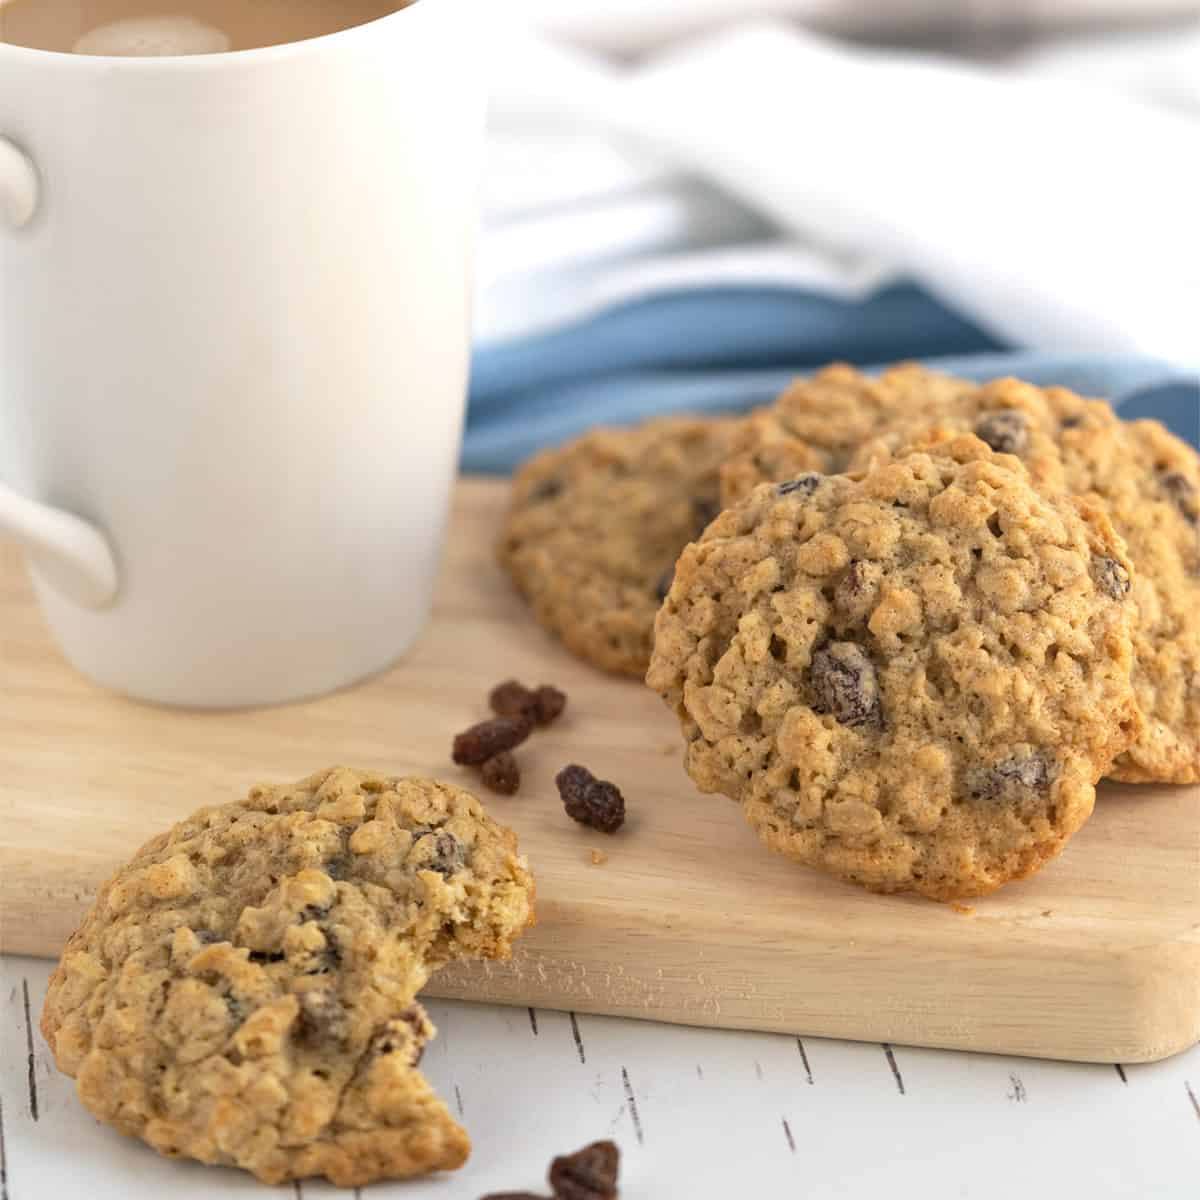 Spiced Oatmeal Raisin Cookies with a cup of coffee.